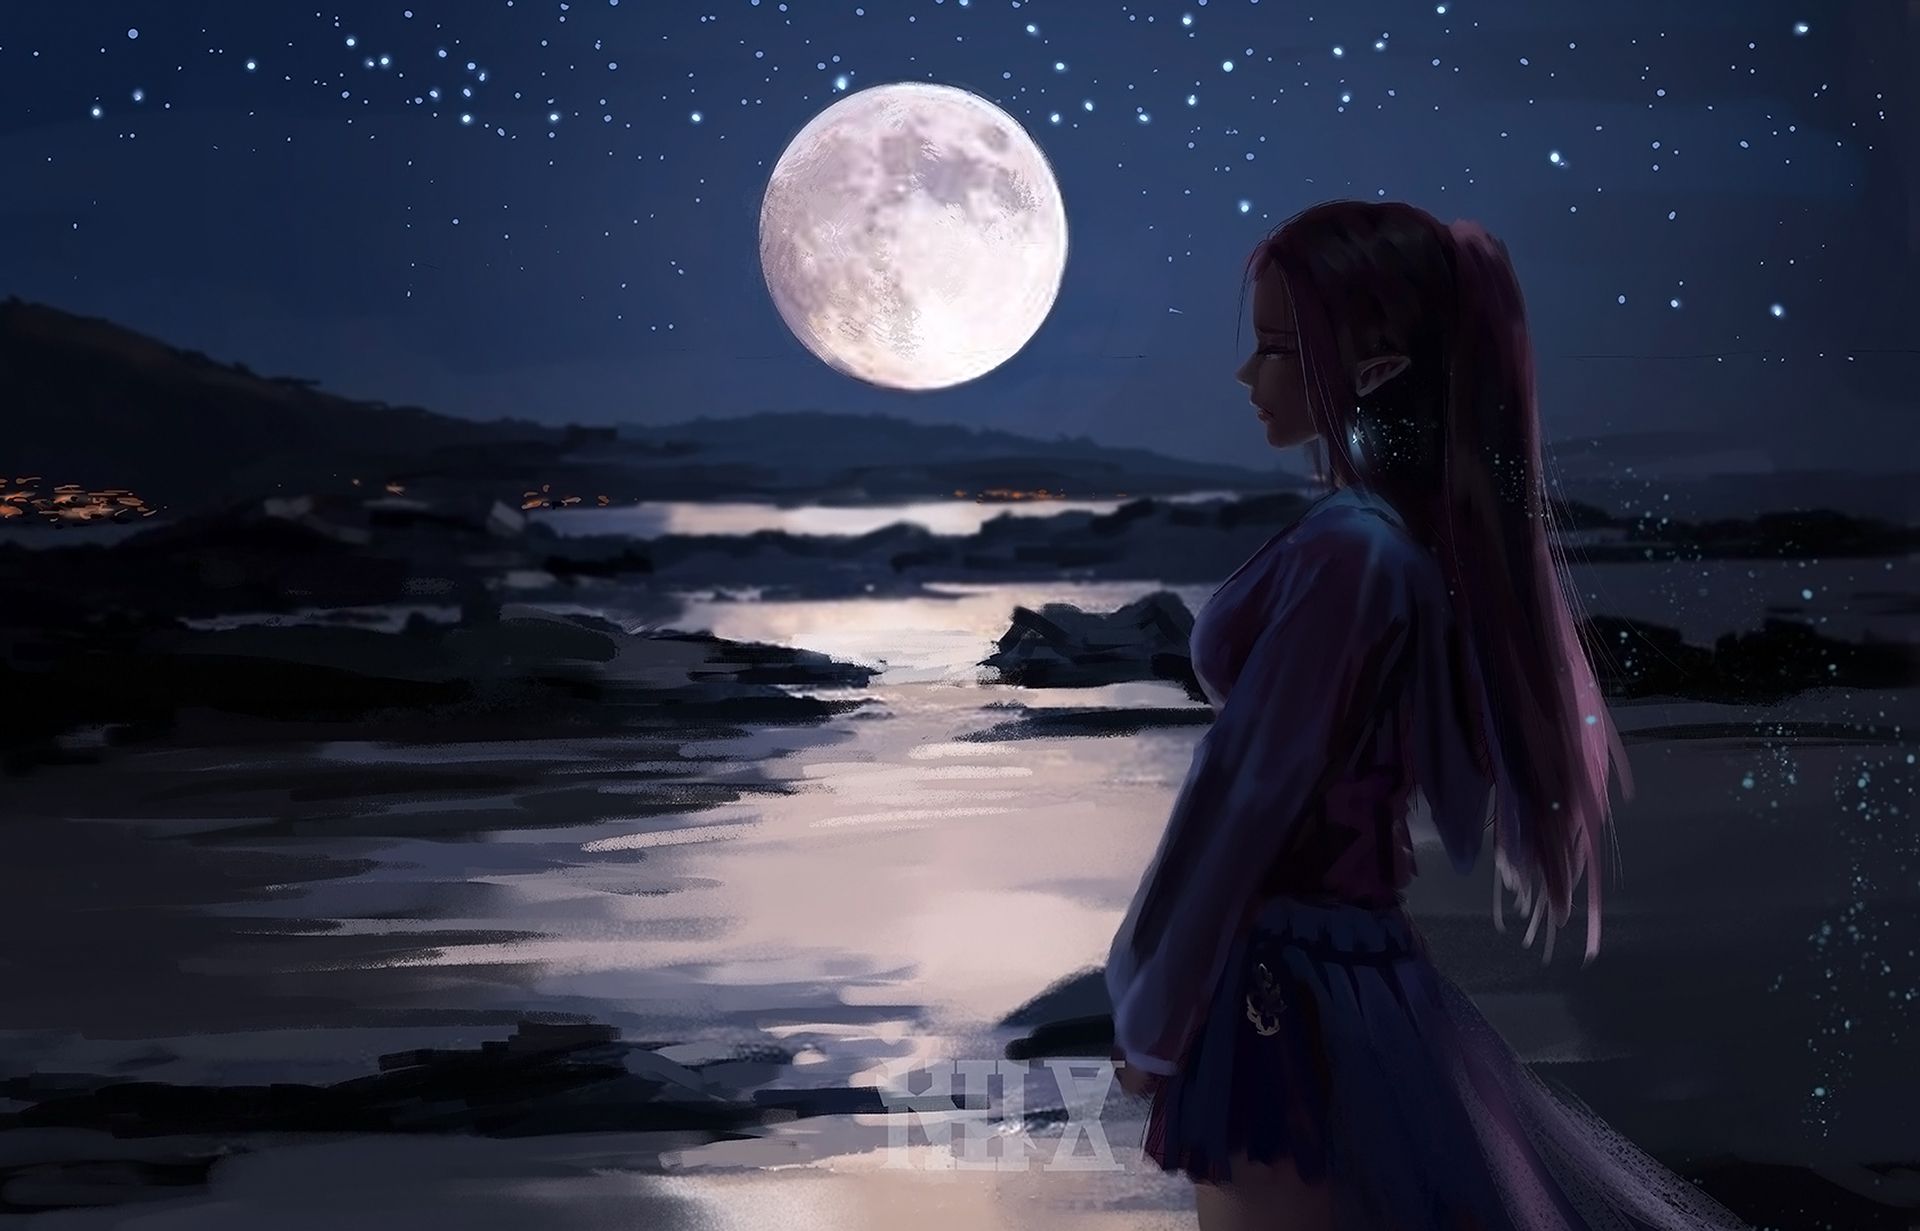 Fantasy Women Moon River, HD Artist, 4k Wallpaper, Image, Background, Photo and Picture